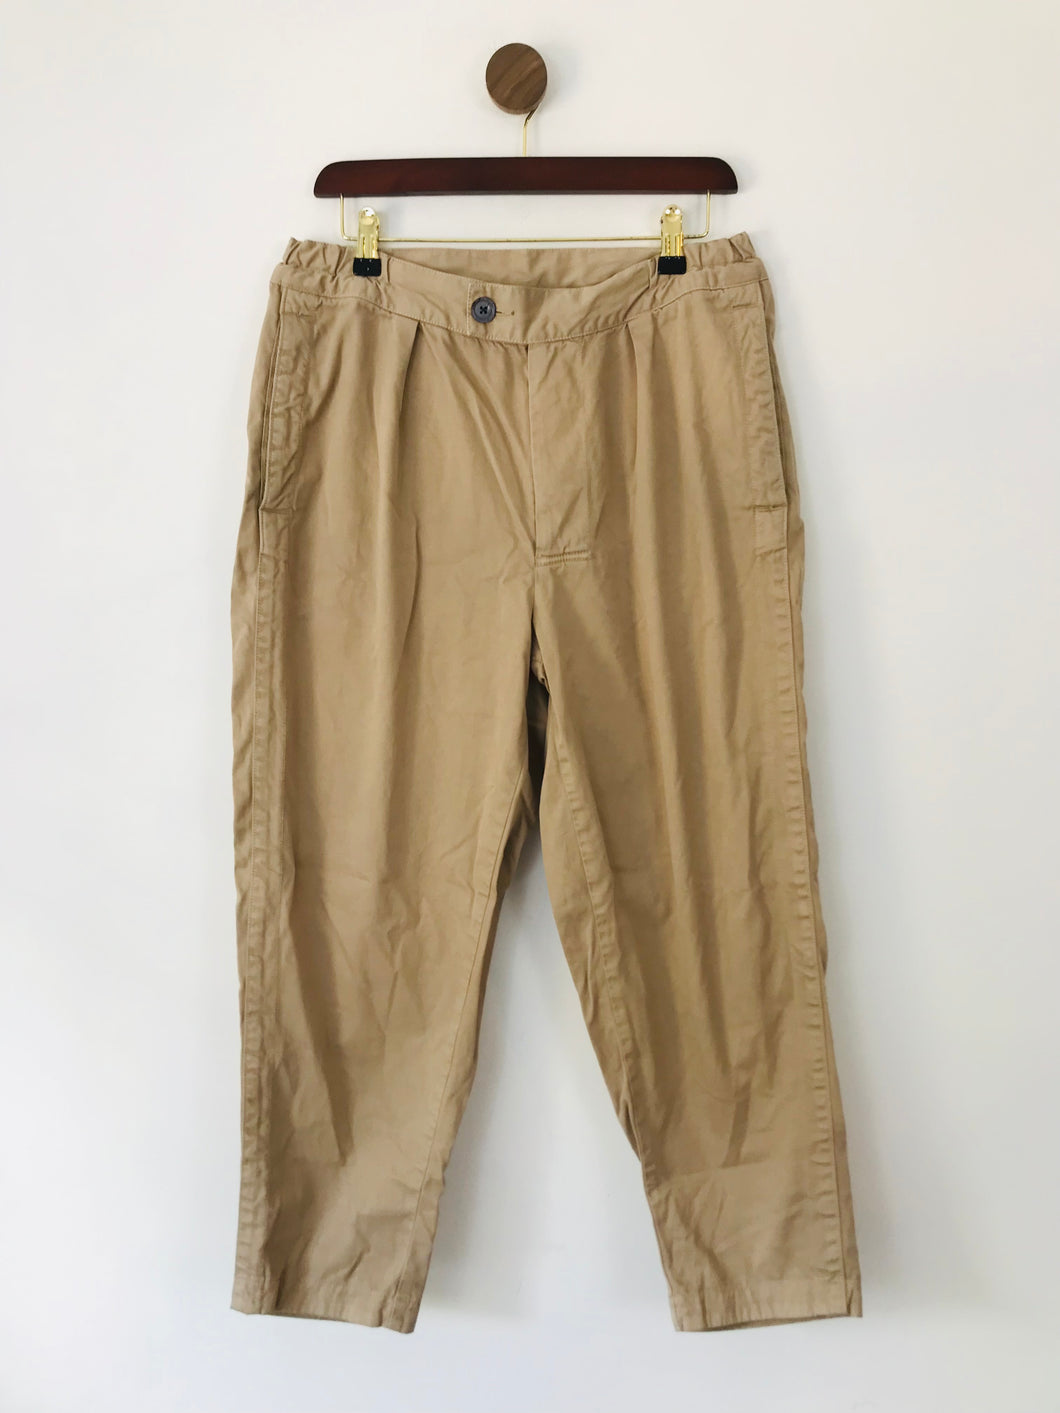 Barbour Men's Chinos Trousers | M | Beige